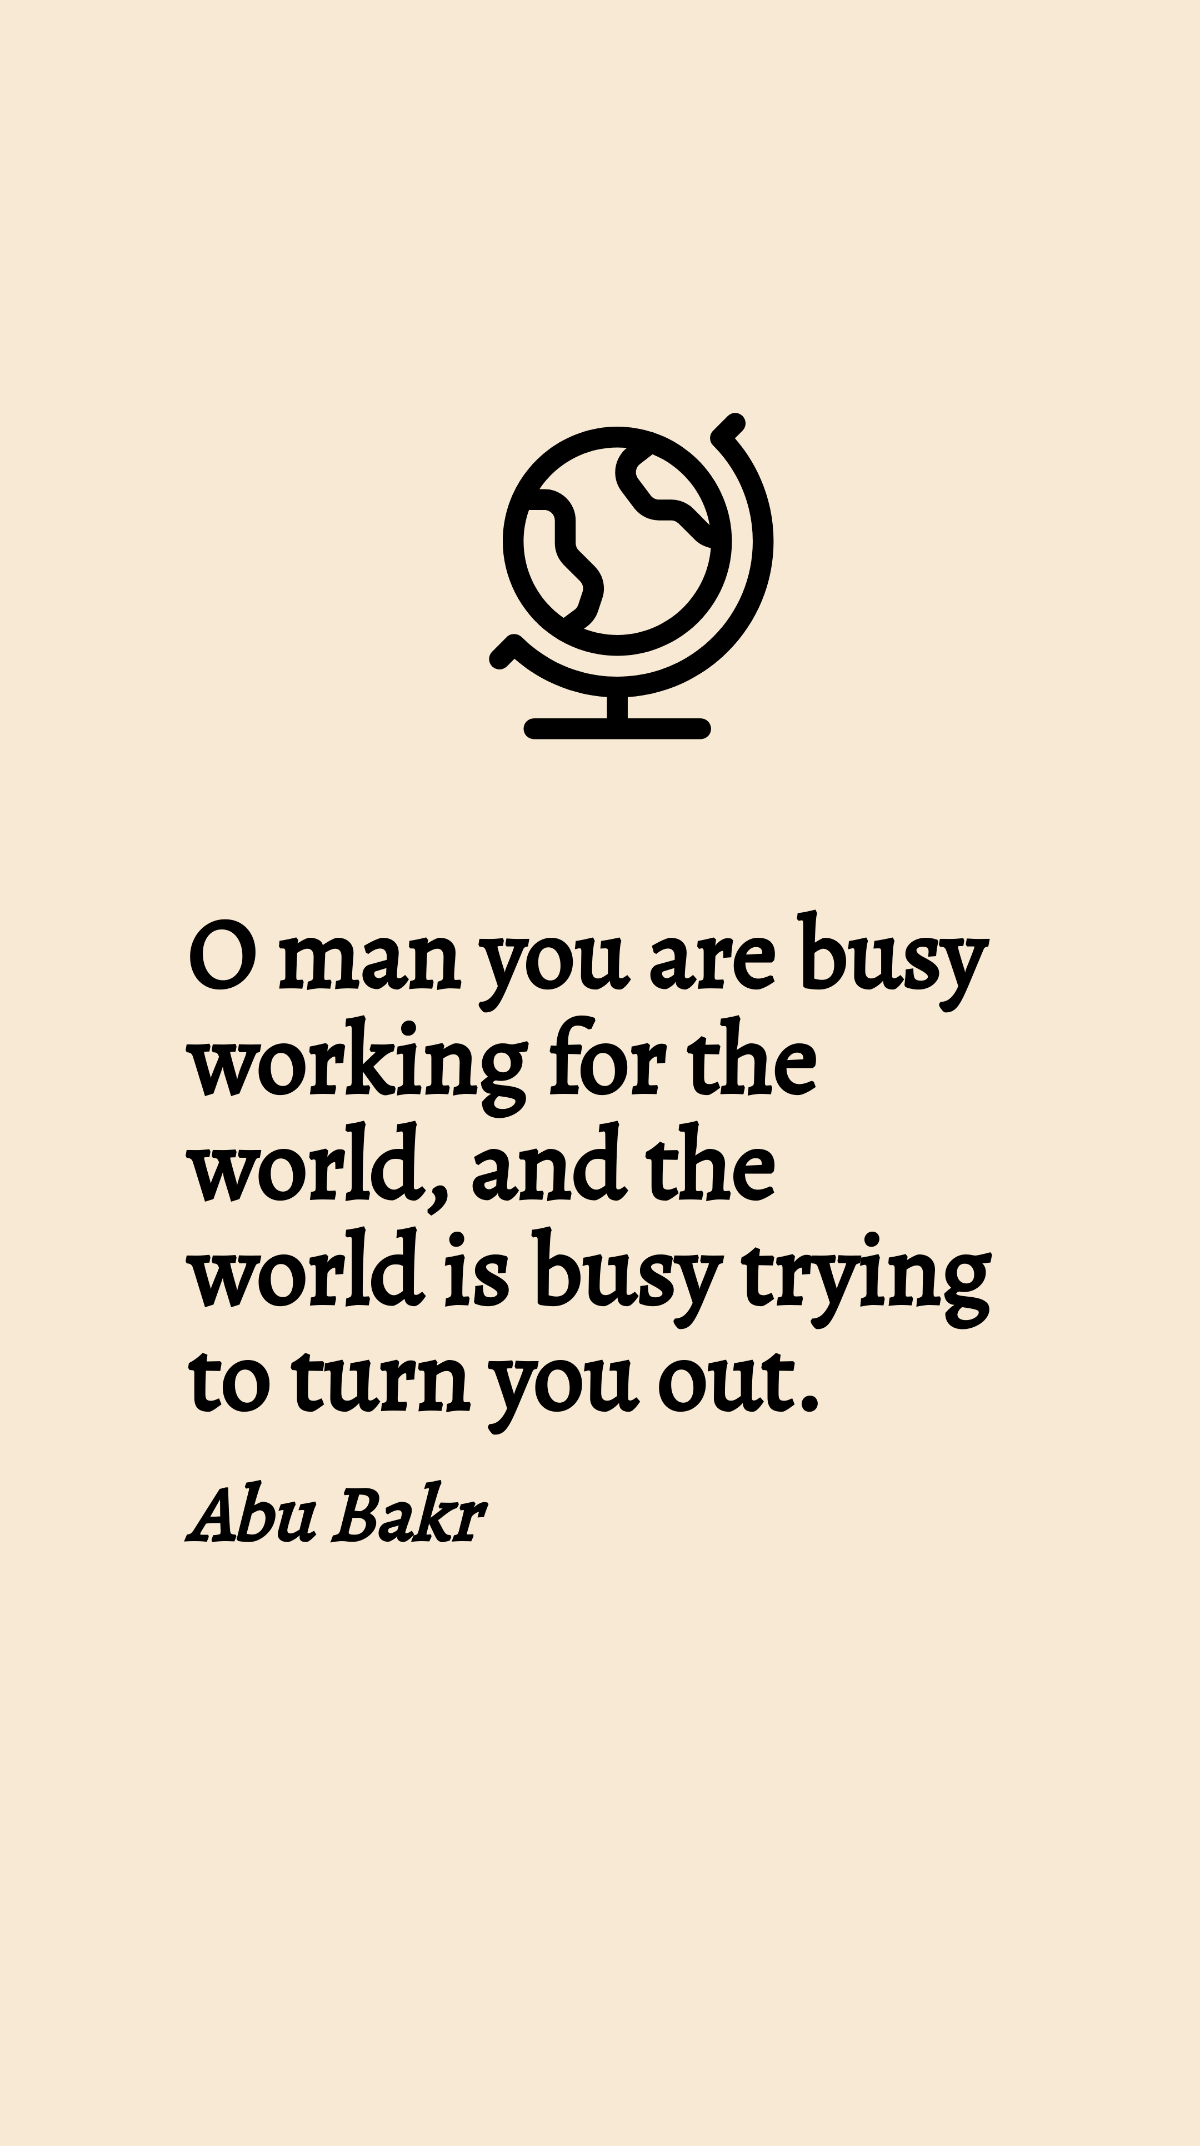 Free Abu Bakr - O man you are busy working for the world, and the world is busy trying to turn you out. Template